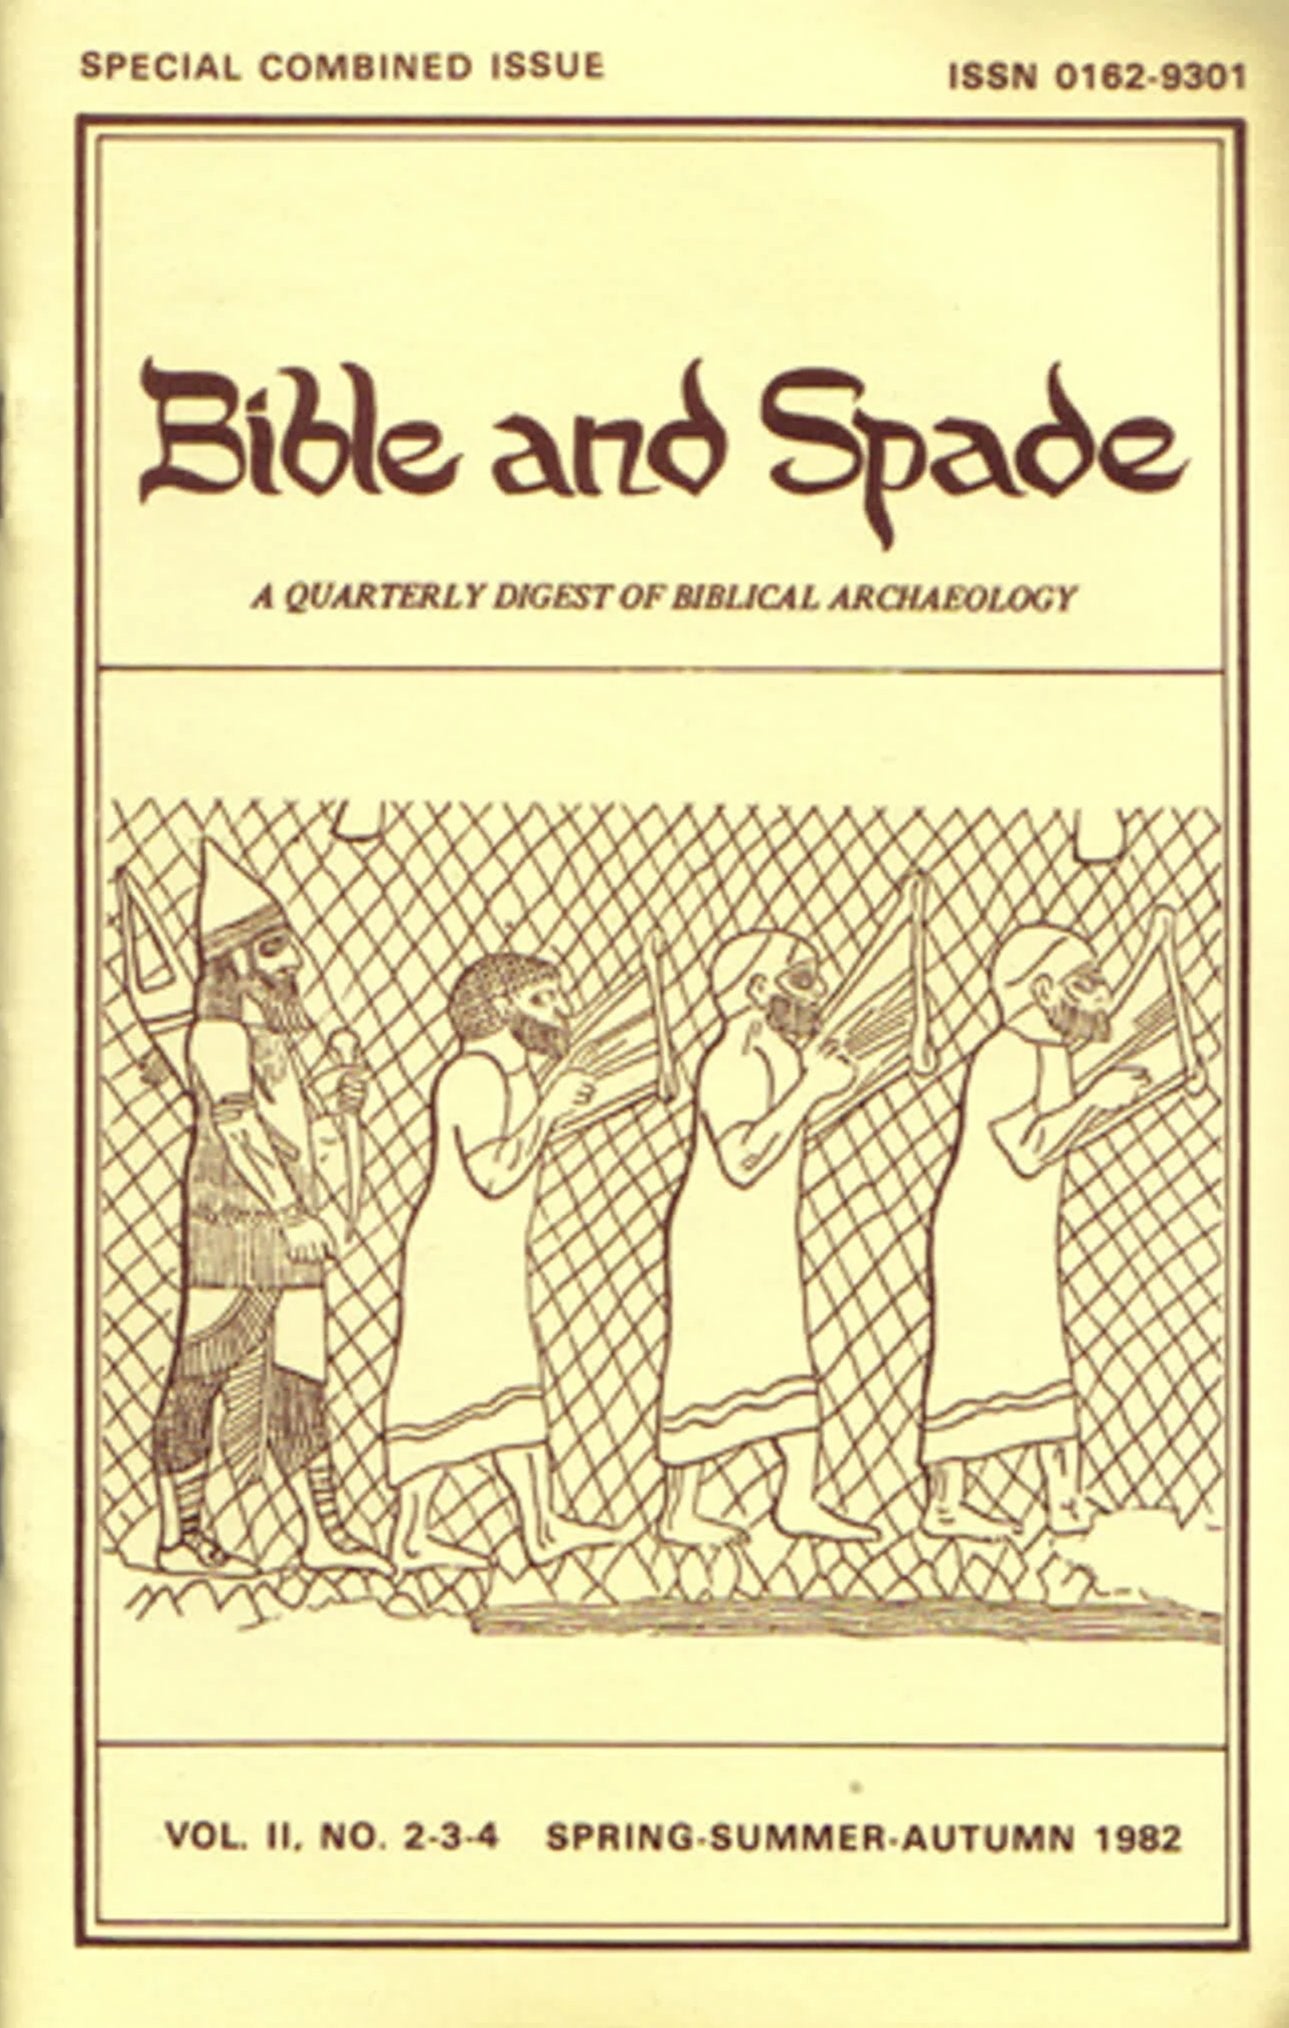 Issues of BIBLE and SPADE produced in 1982